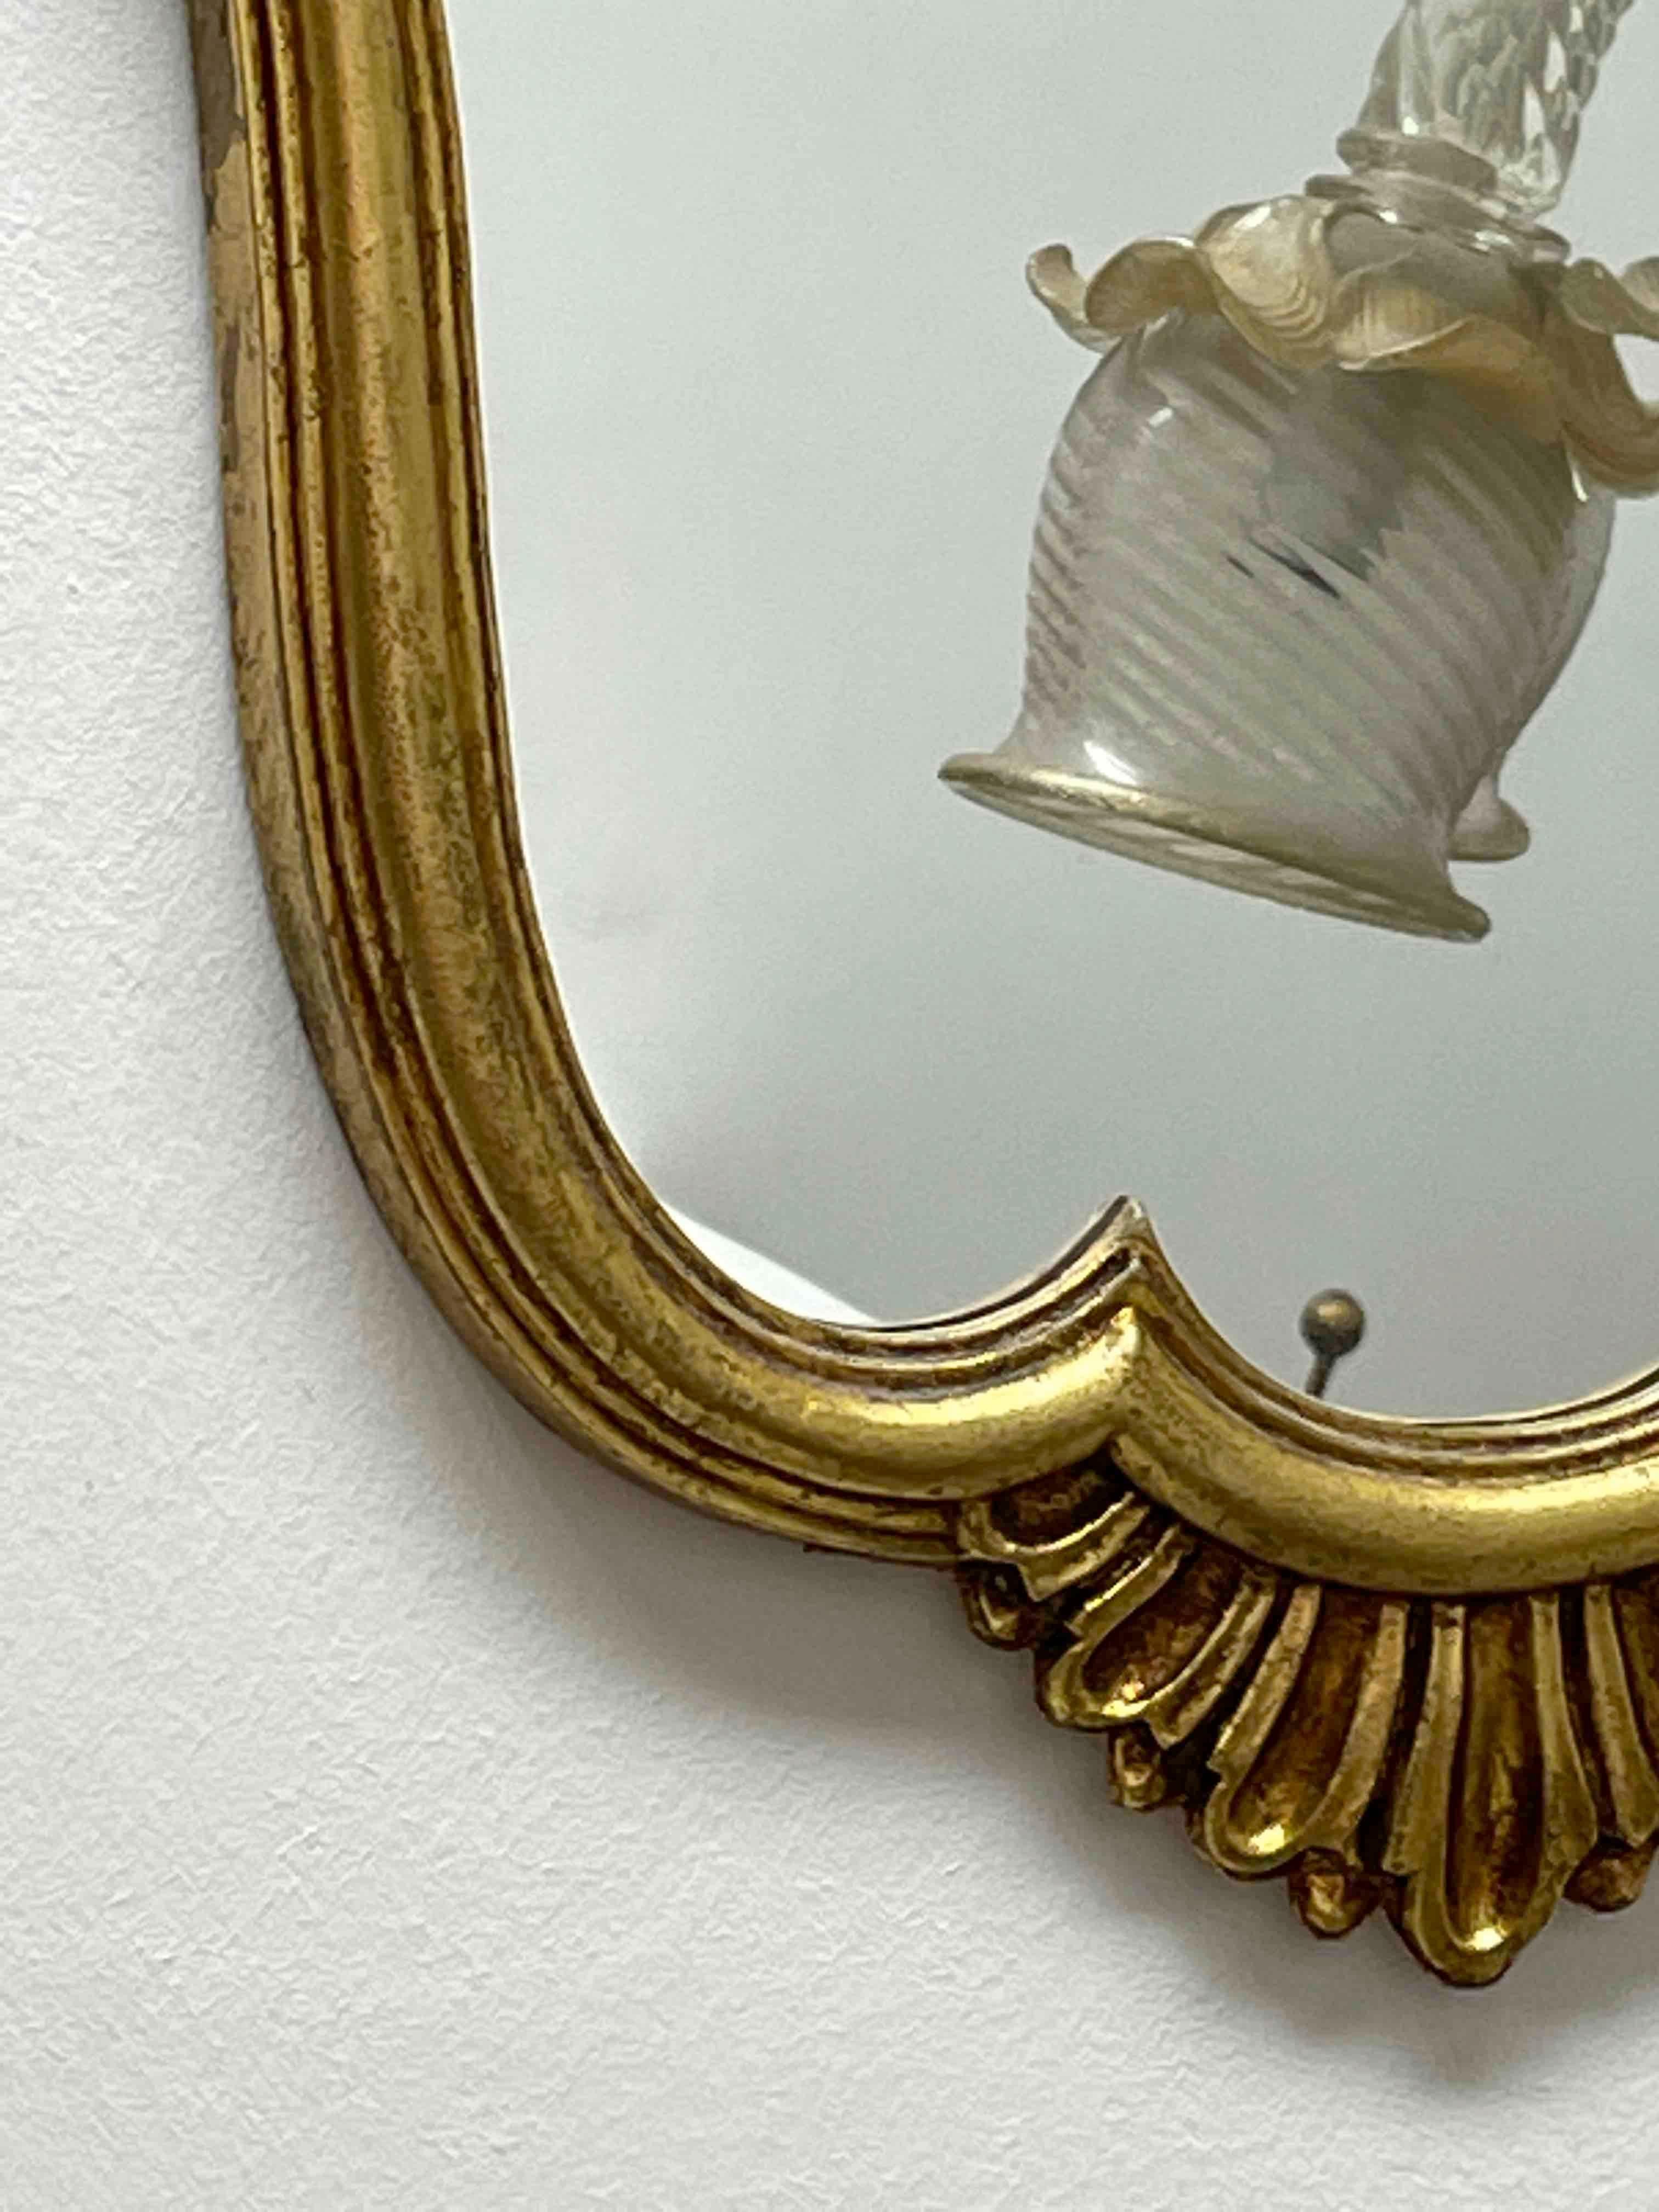 Stunning toleware mirror. The gilded frame surrounds a glass mirror. Made in Italy, circa 1950s. Beautiful mirror for any room or your hall entry. Nice addition to any room.